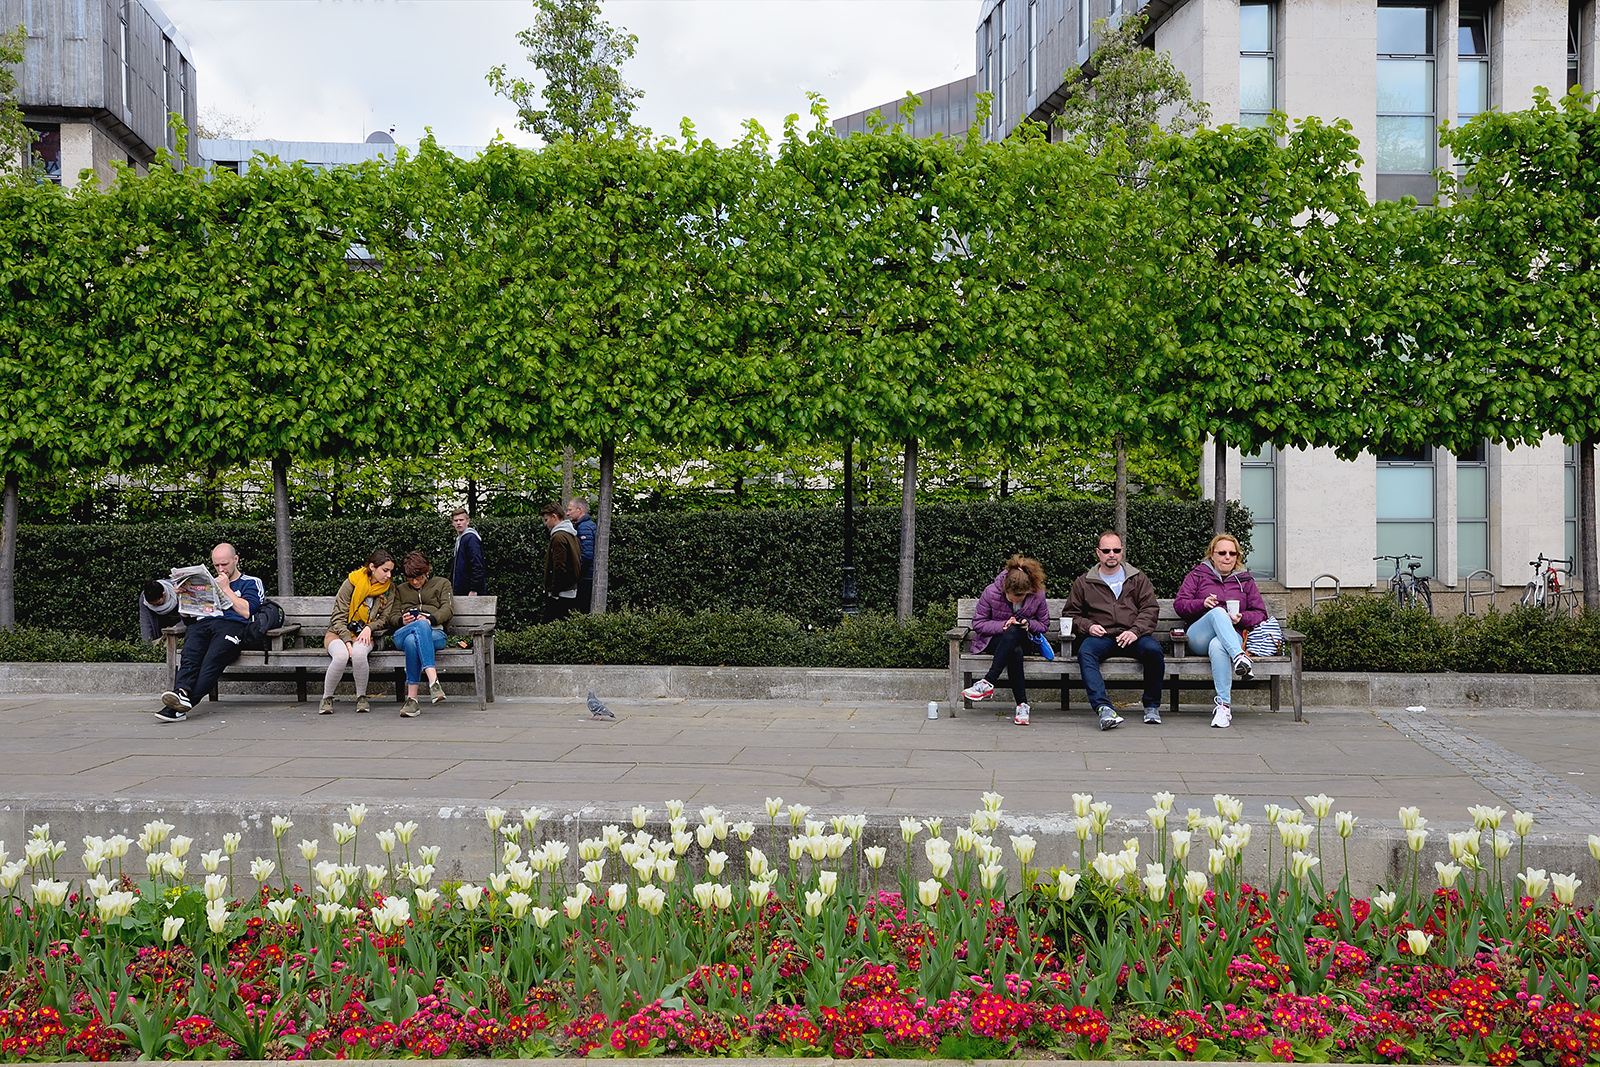 20170416_City-of-London_New-Grange_People-and-flowers-in-Jubilee-gardens